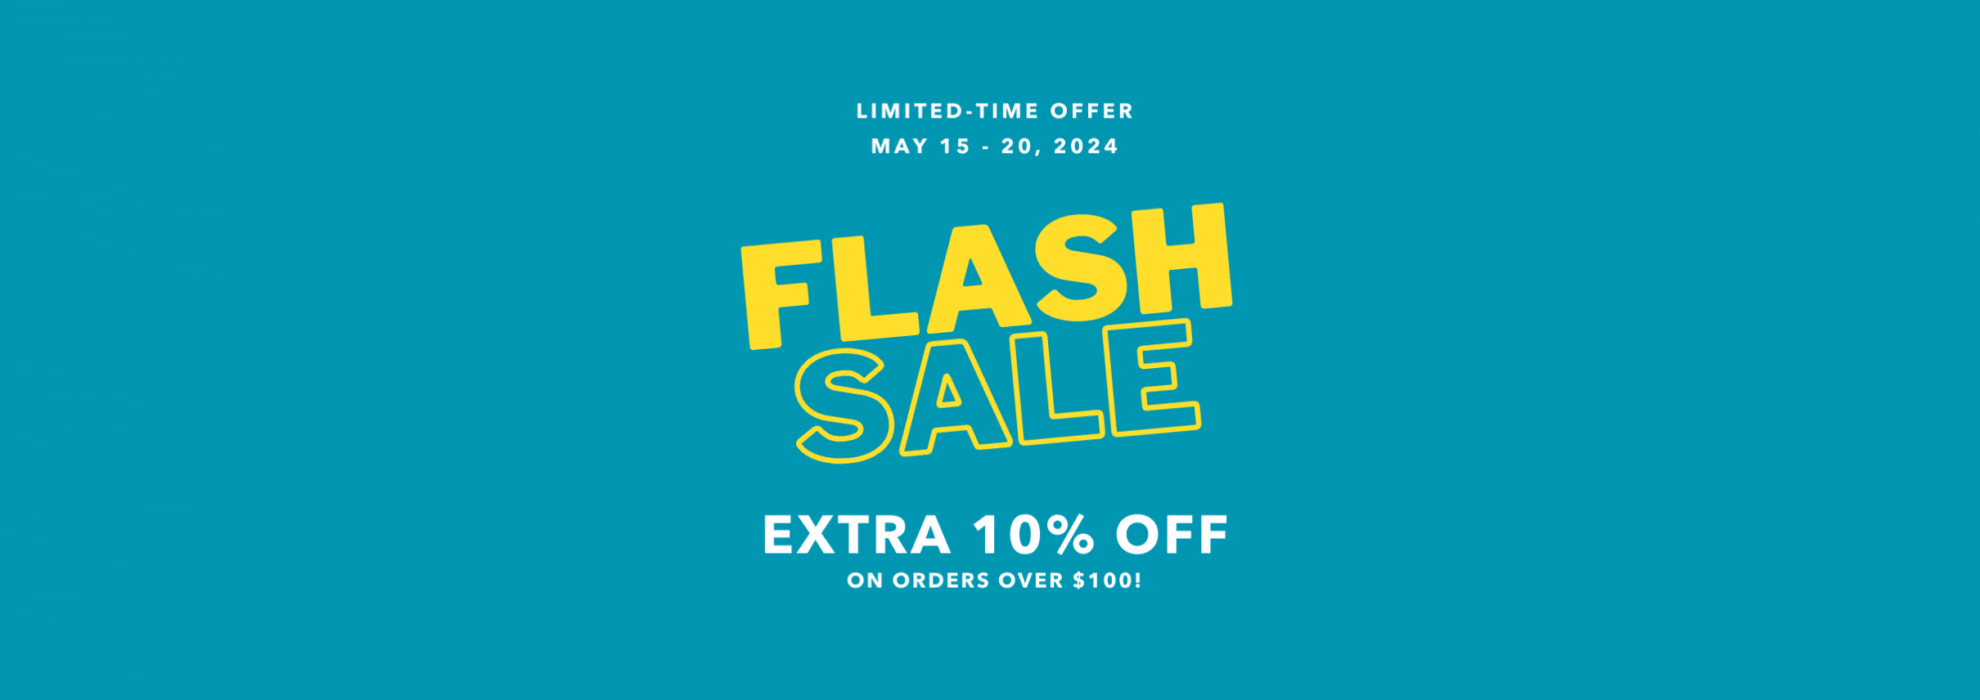 FLASH SALE EXTRA 10% OFF